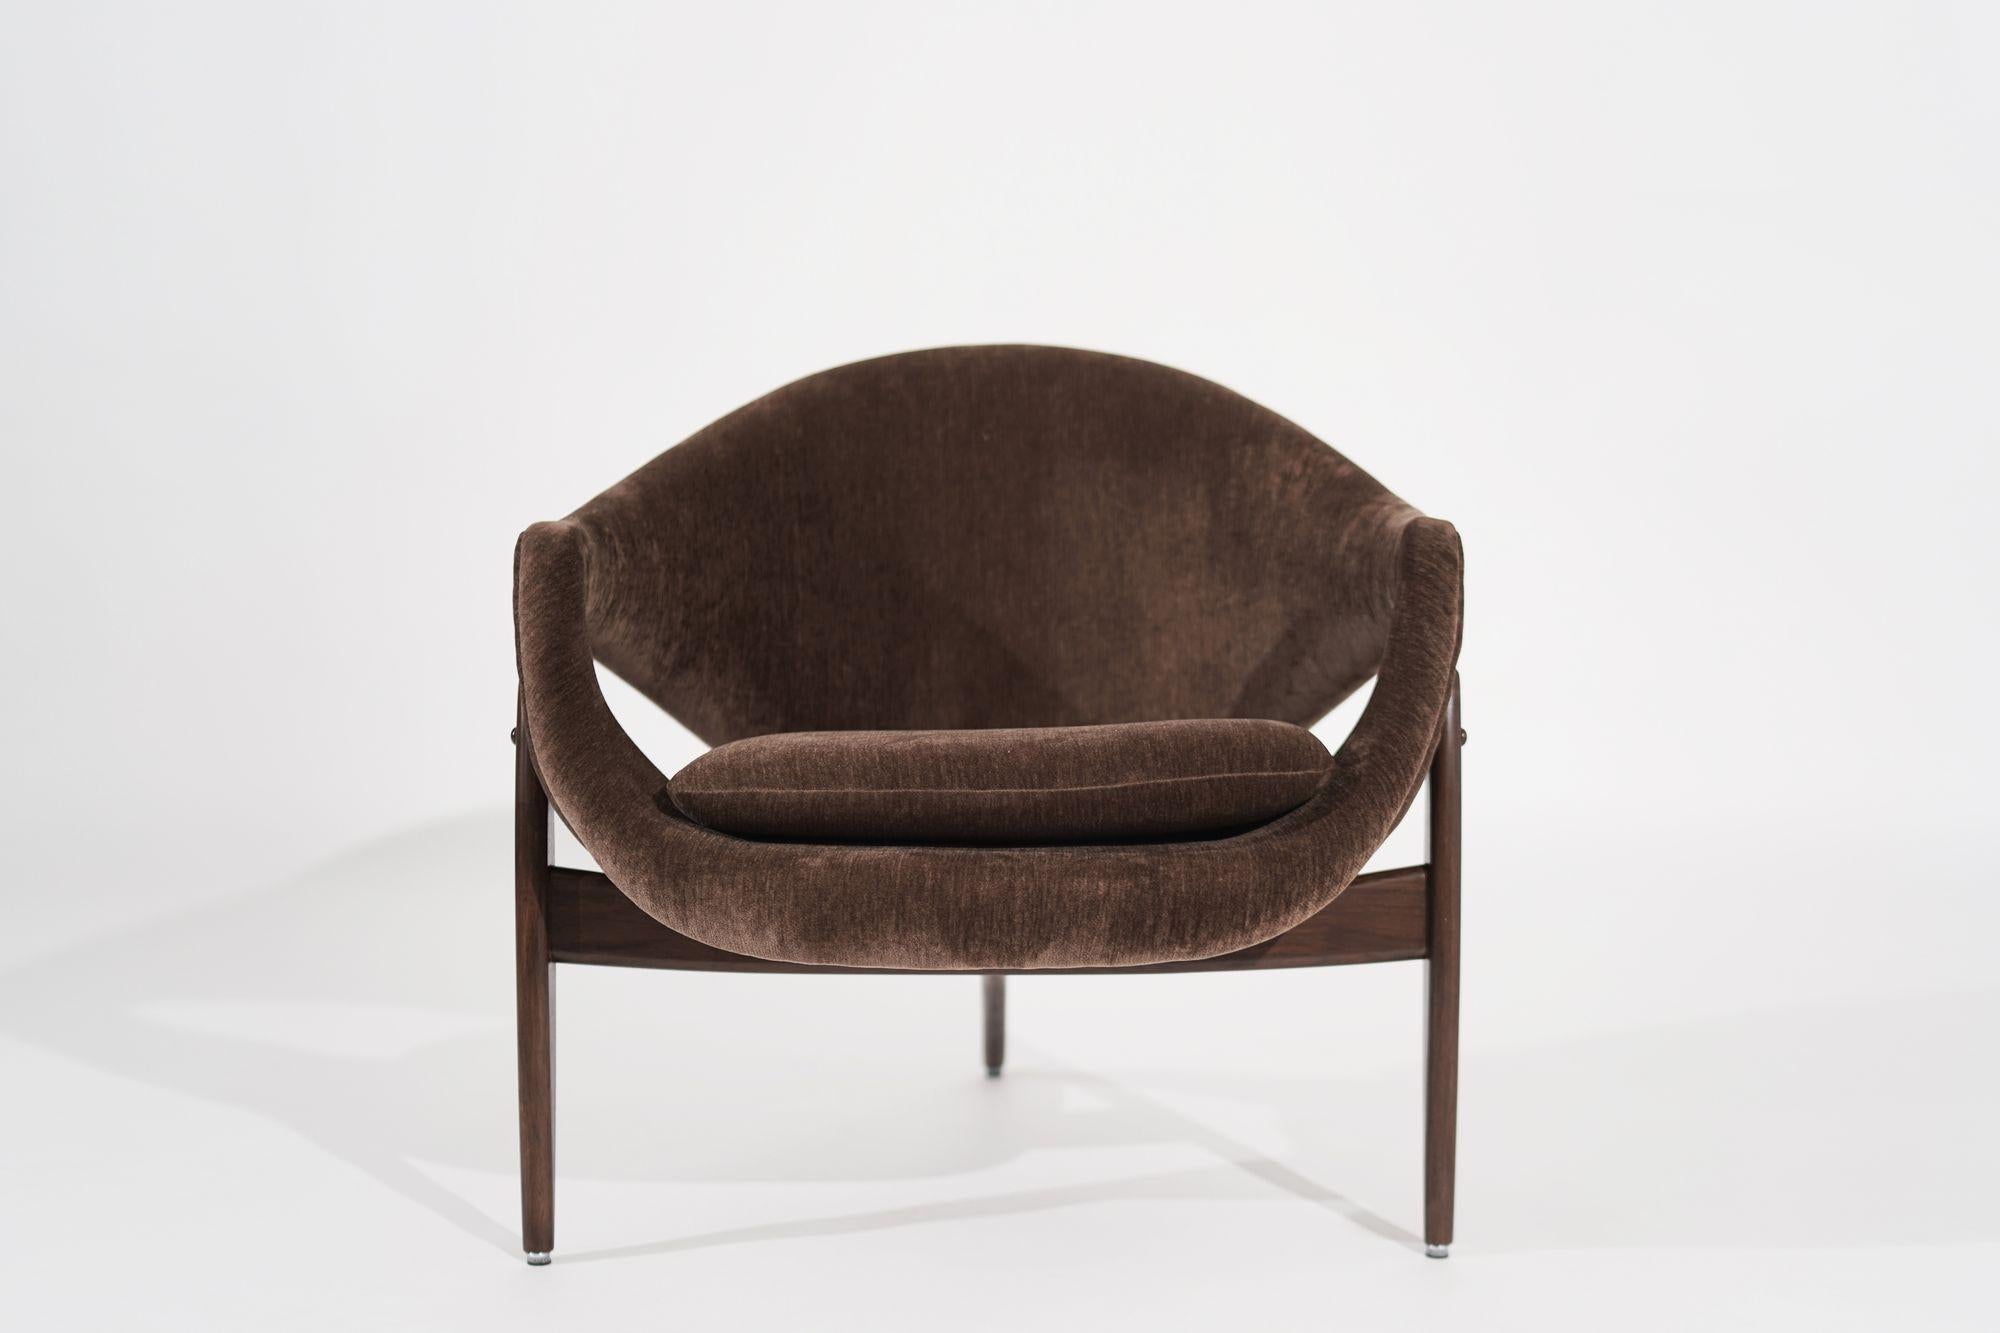 20th Century Sculptural Lounge Chairs by Luigi Tiengo for Cimon, Canada, C. 1960s